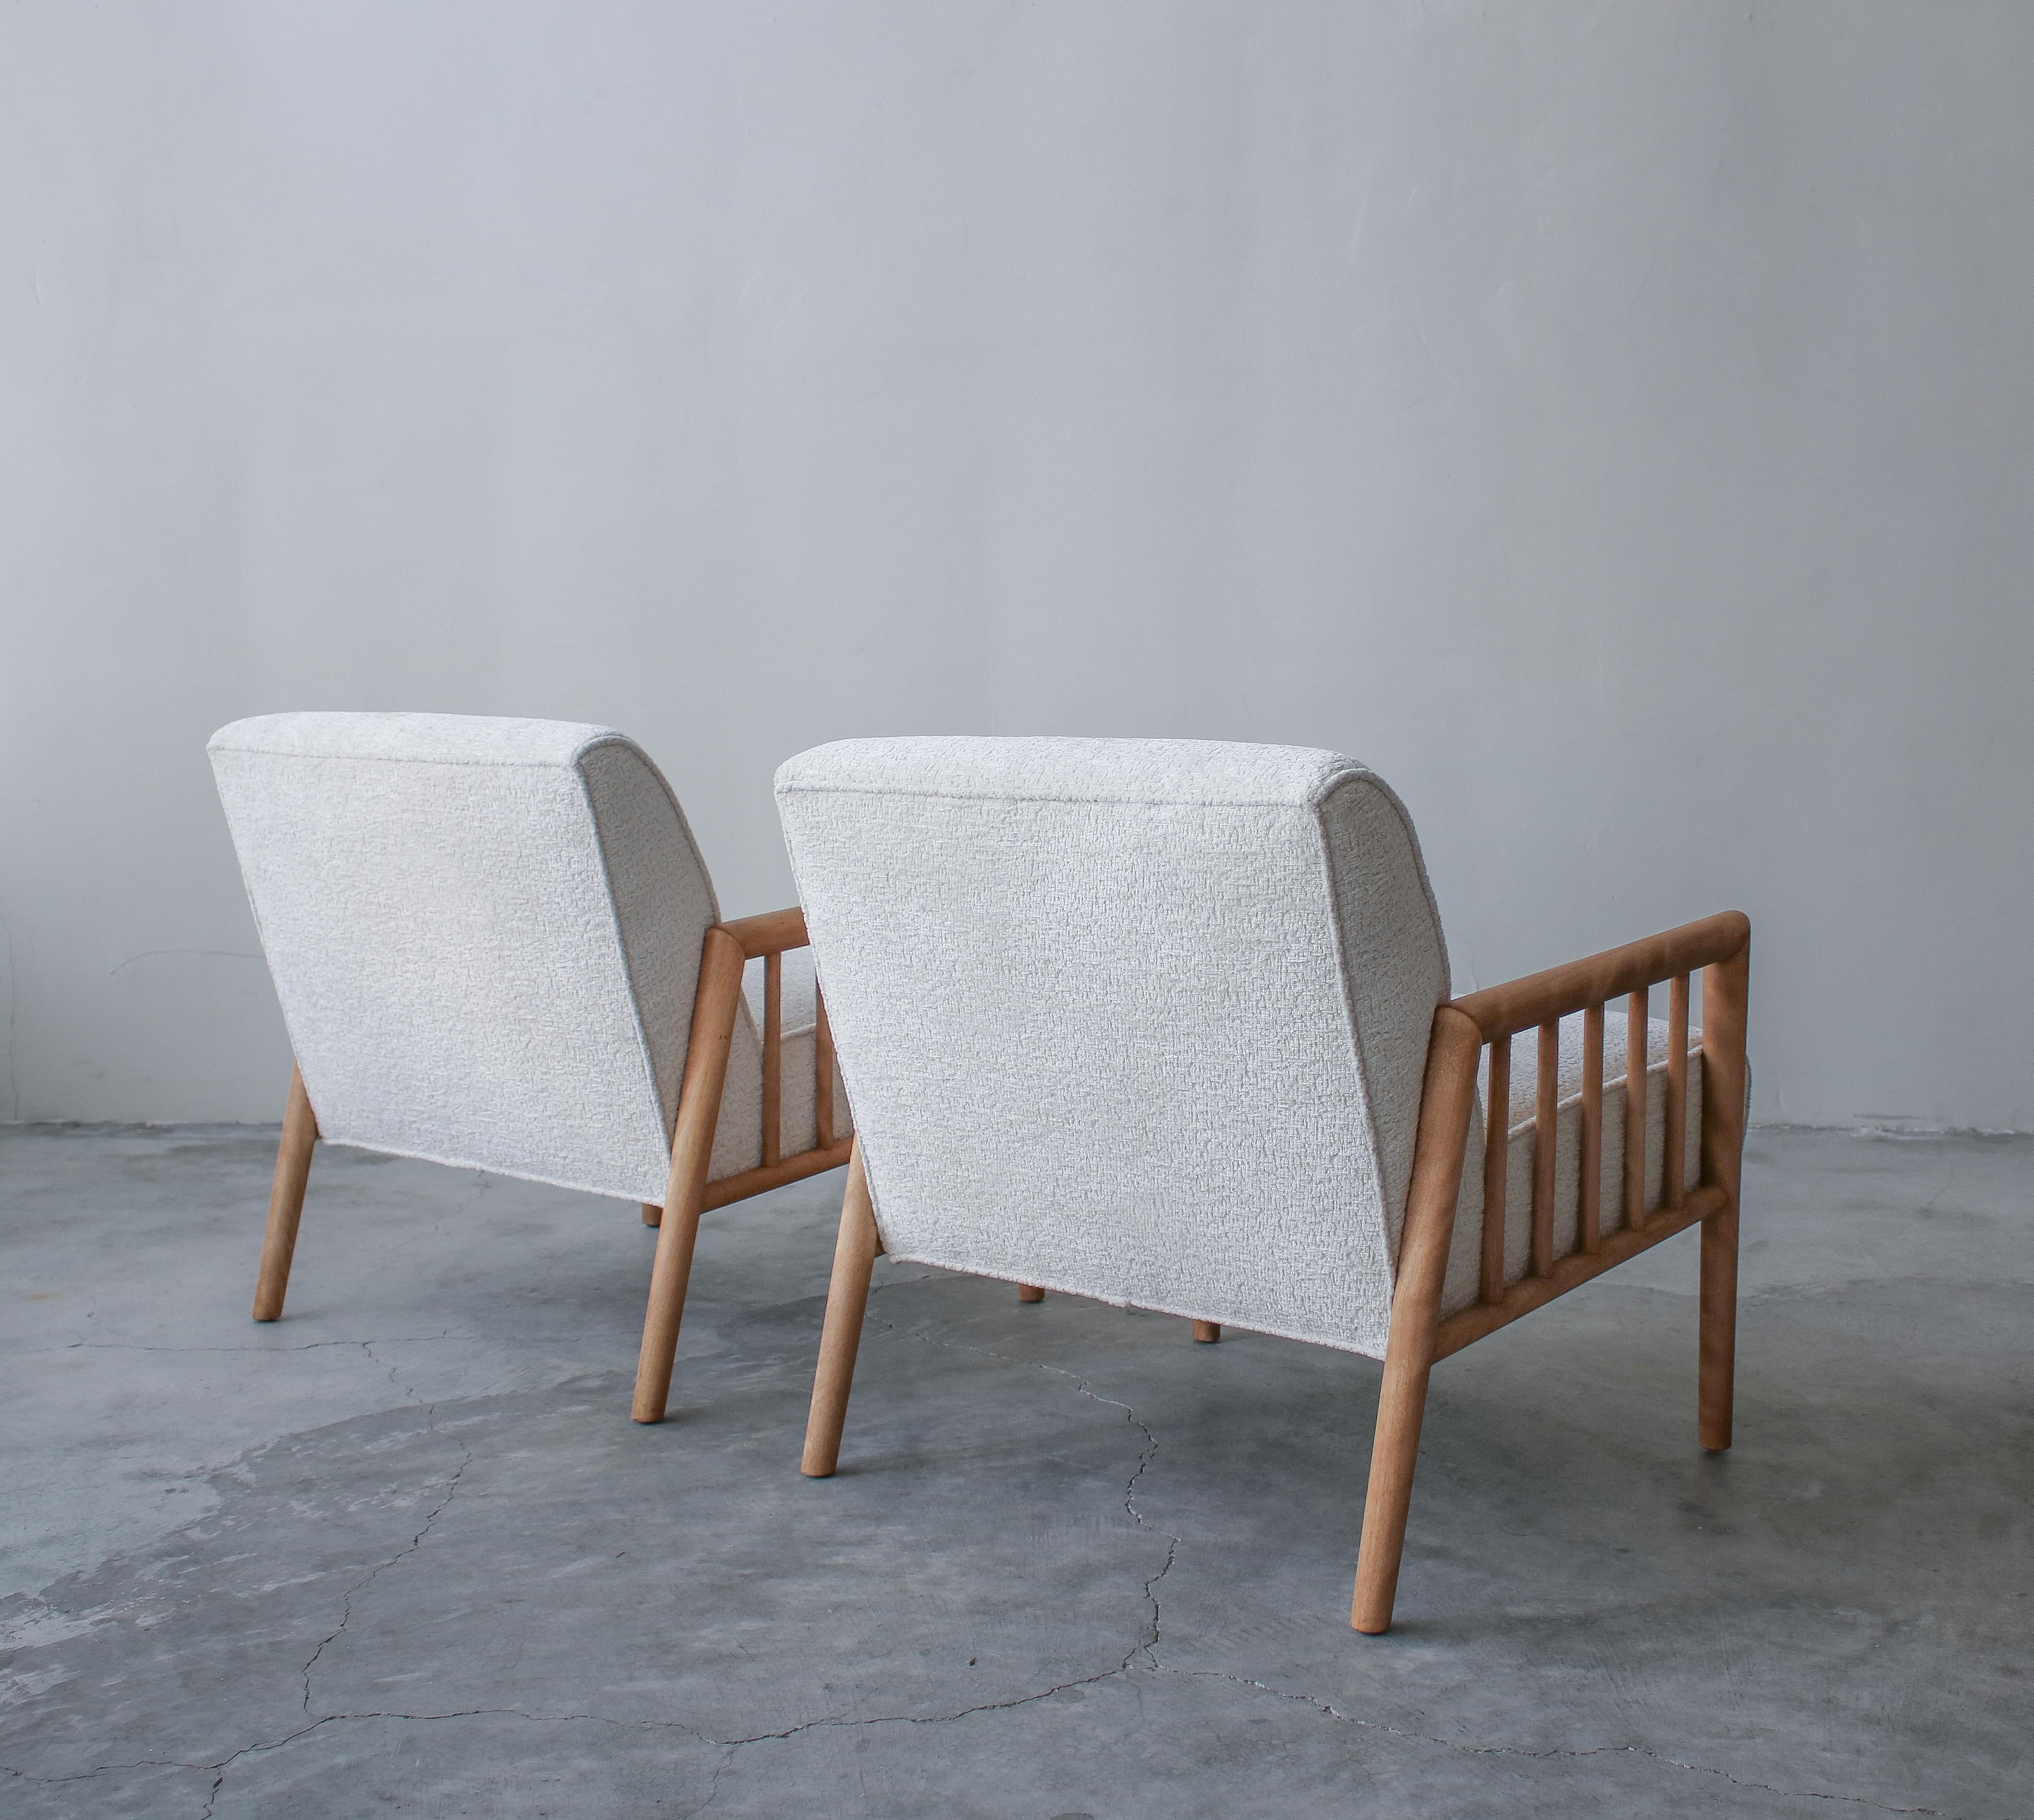 Pair of Minimalist Midcentury Lounge Chairs by Conant Ball 1